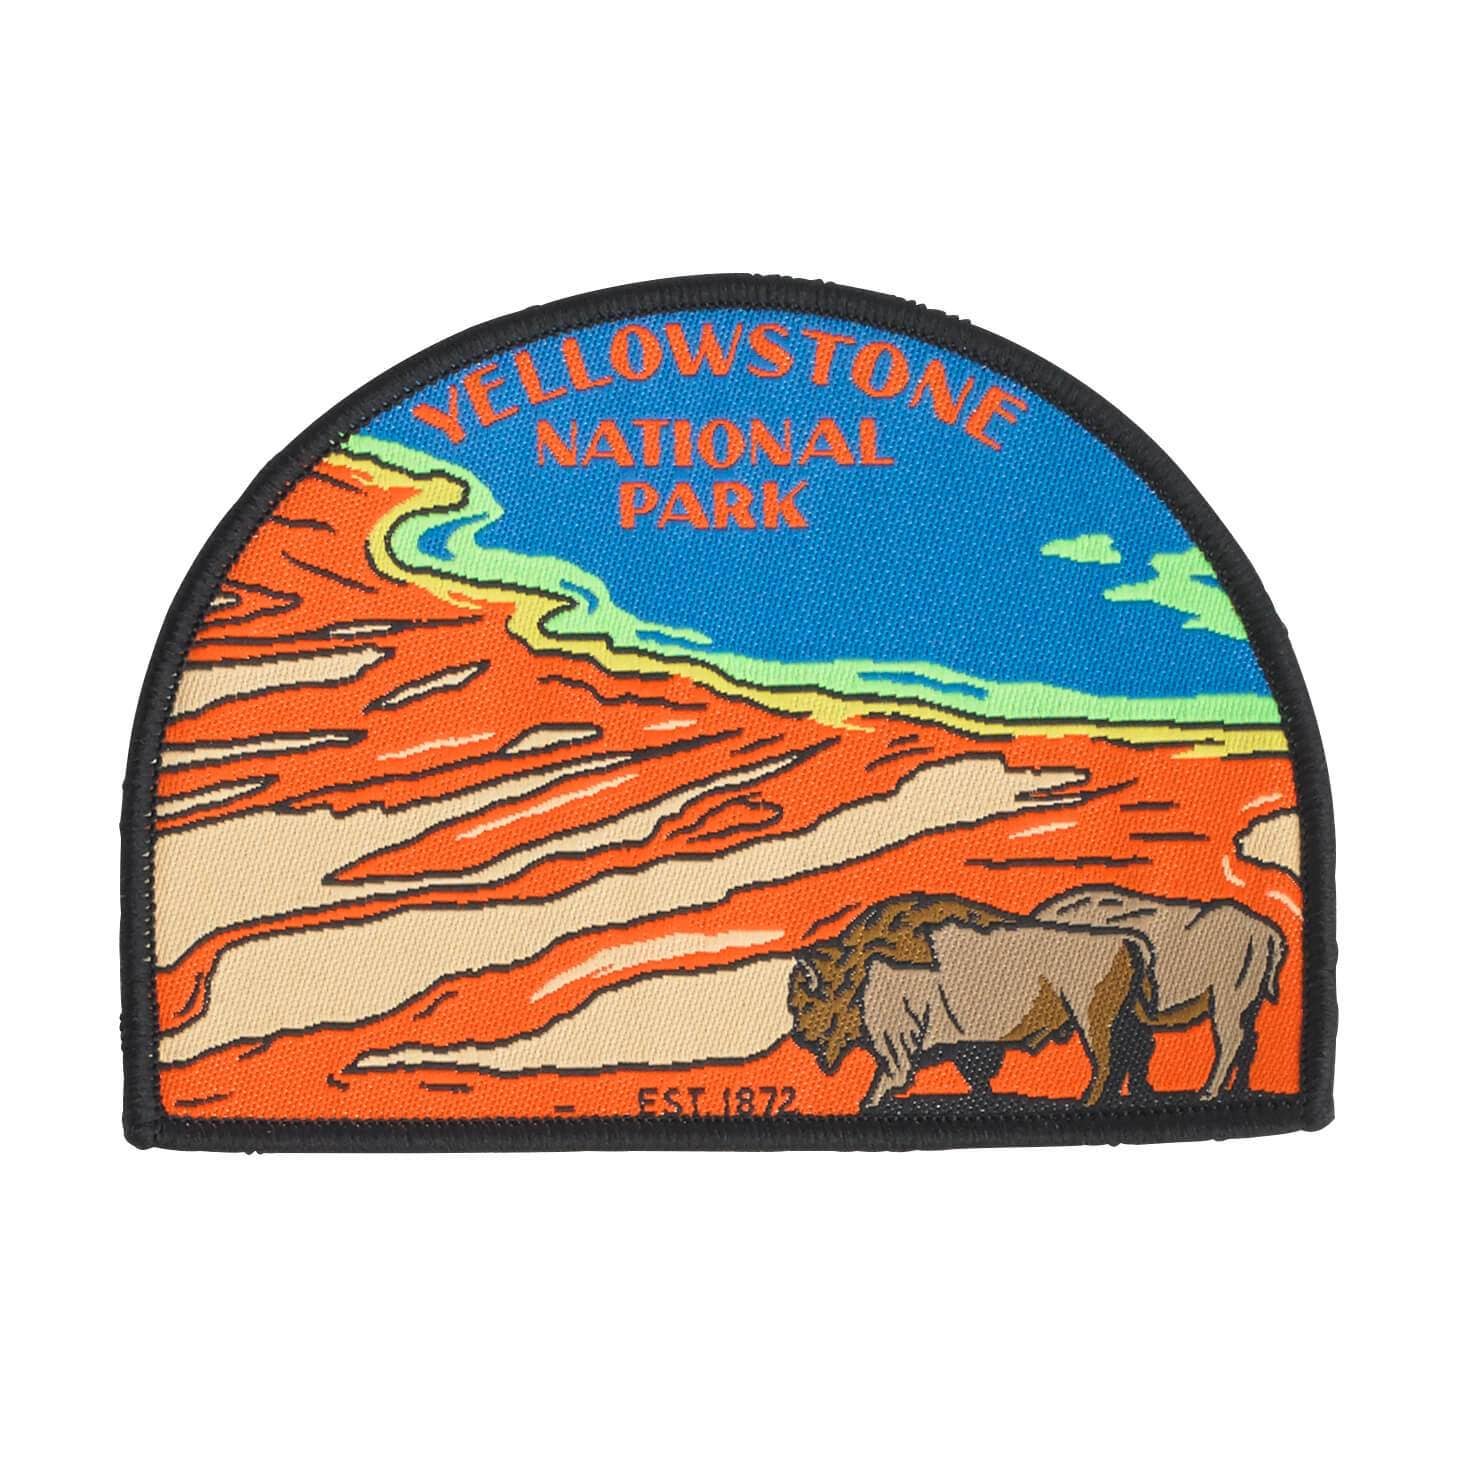 10 Best Yellowstone National Park Patches - National Parks Supply Co.